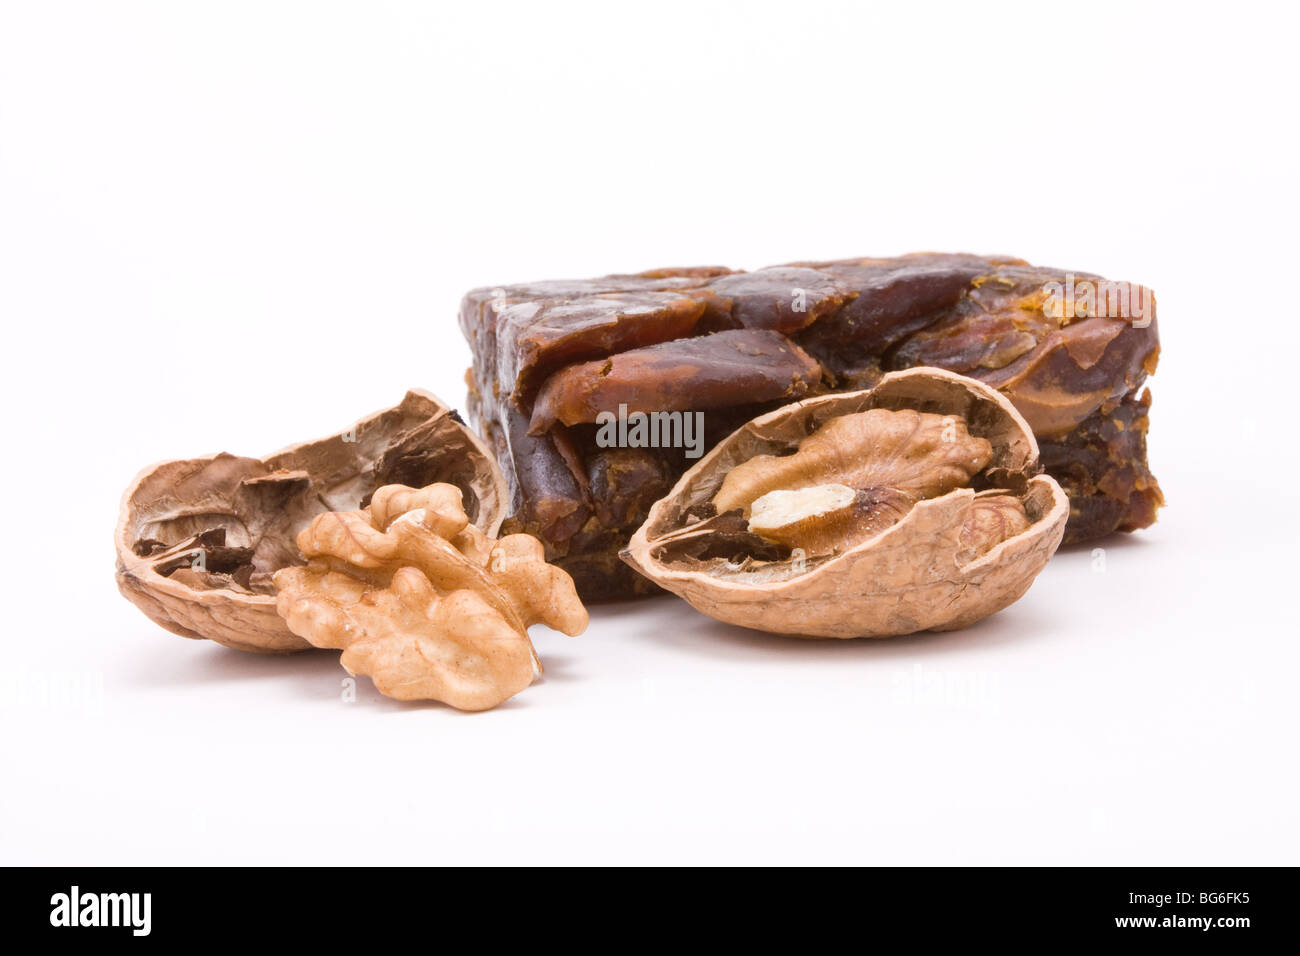 Block of pressed, dried dates with cracked open walnut halfs isolated against white background. Stock Photo